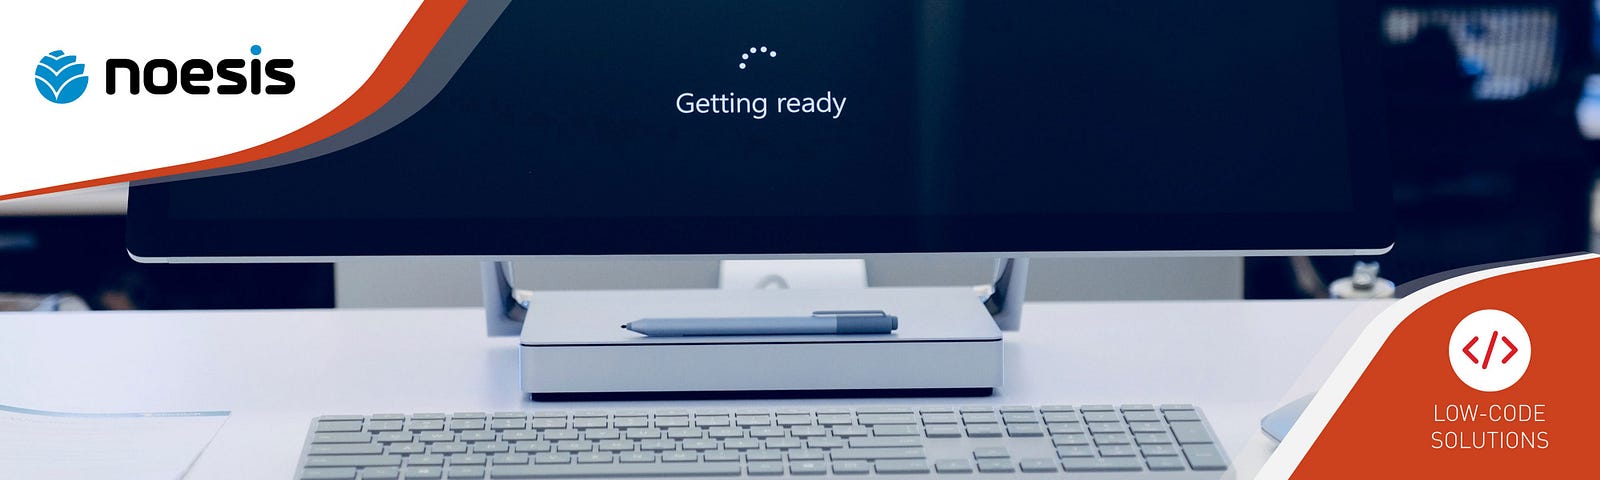 Computer getting ready mode